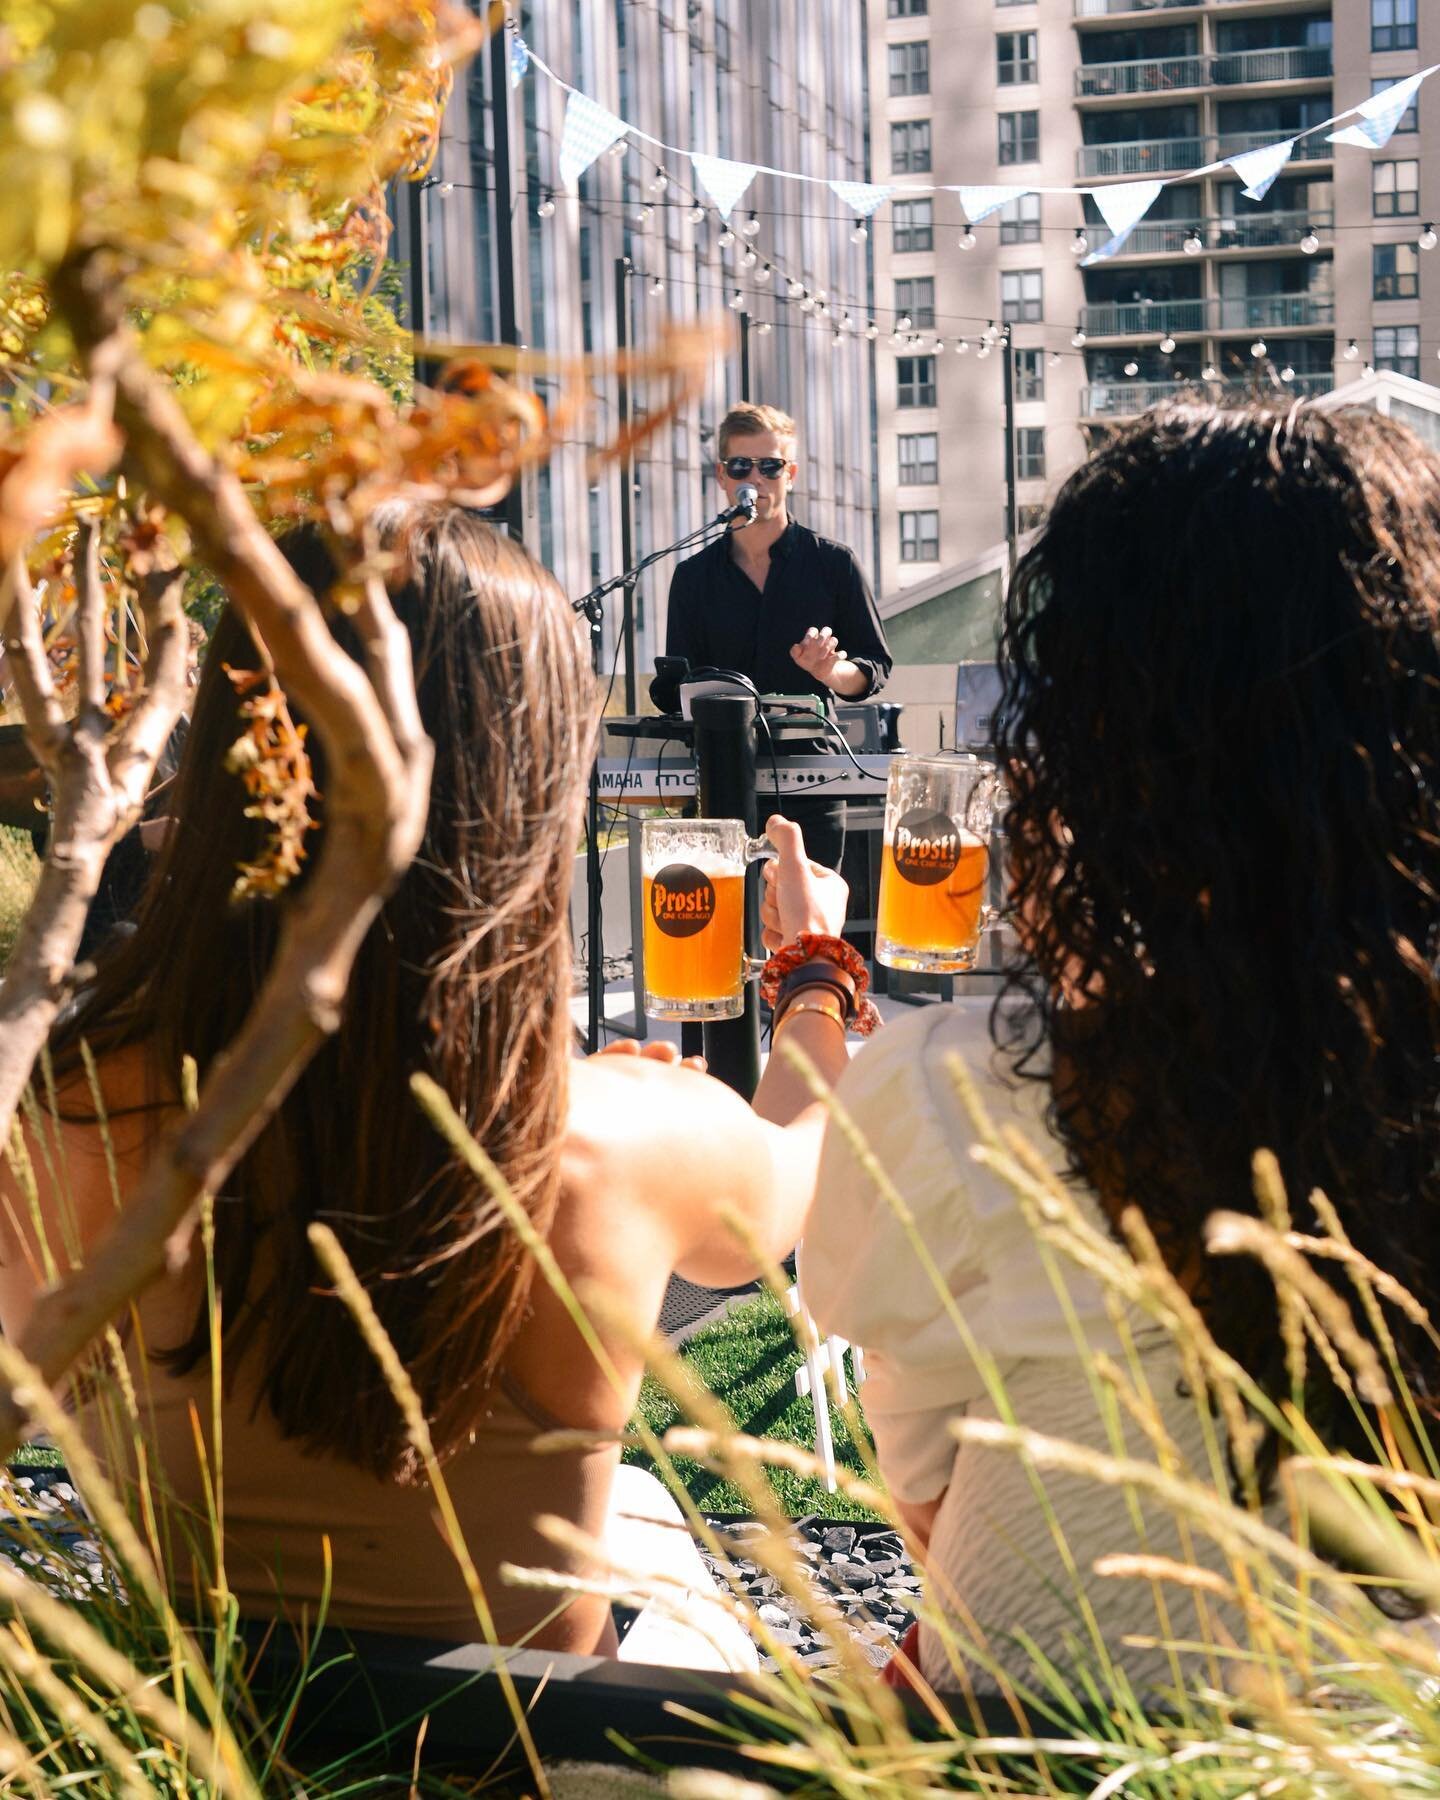 Celebrated this gorgeous October weekend the best way we know how - with frothy brews, incredible live music, delicious bites and killer rooftop views at @liveonechicago An Oktoberfest for the books - prost!

Danke to the party crew: 
🍹 @poursoulsch